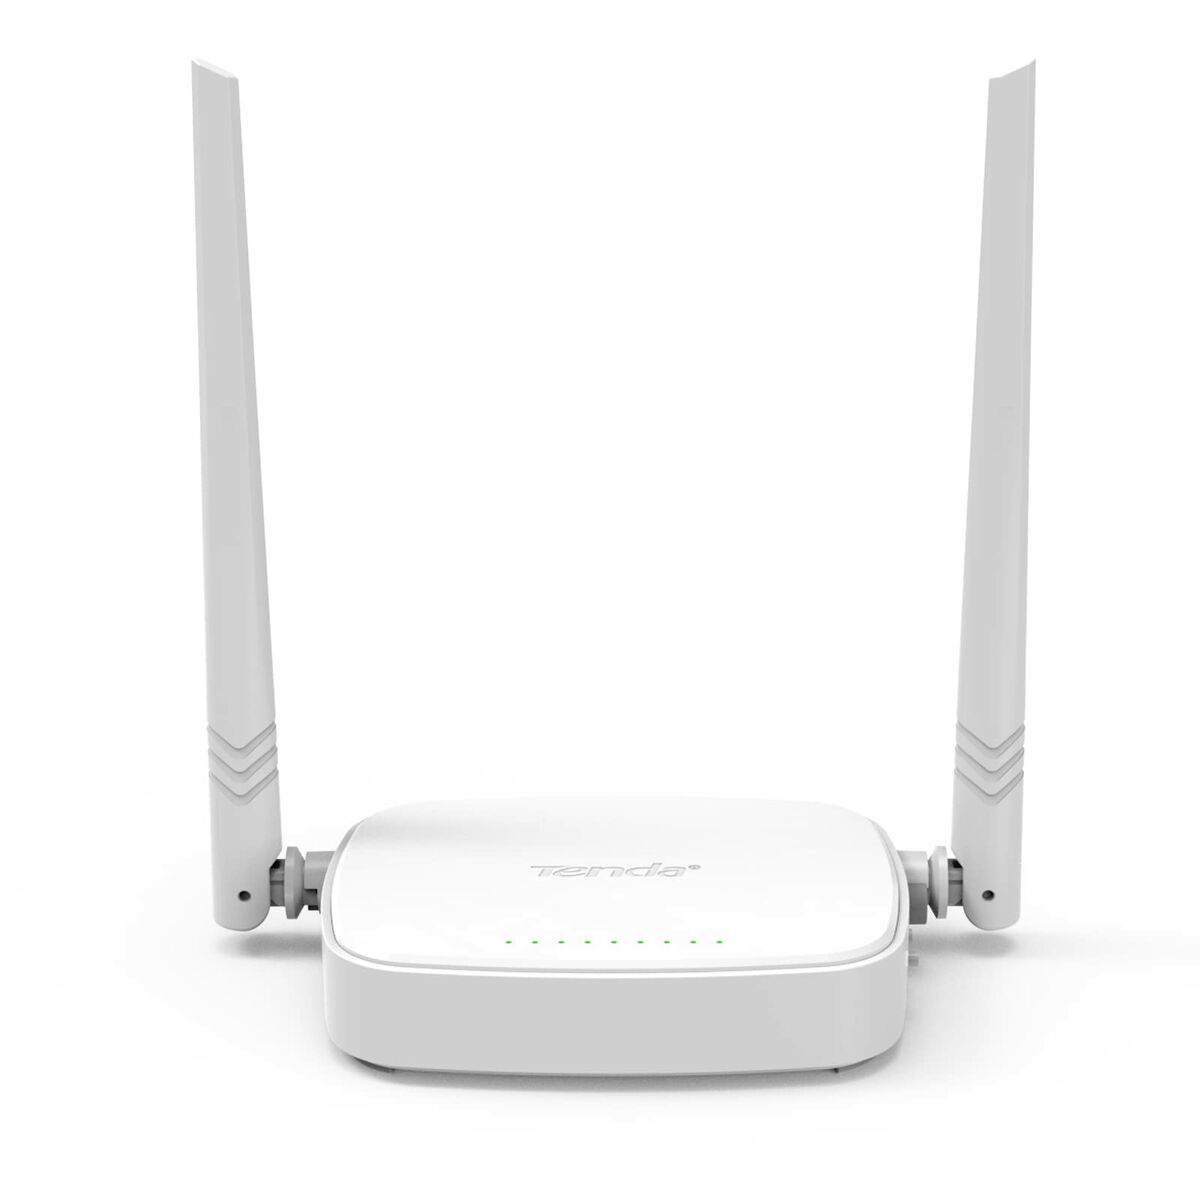 Router Tenda D301 (Odnowione A+)